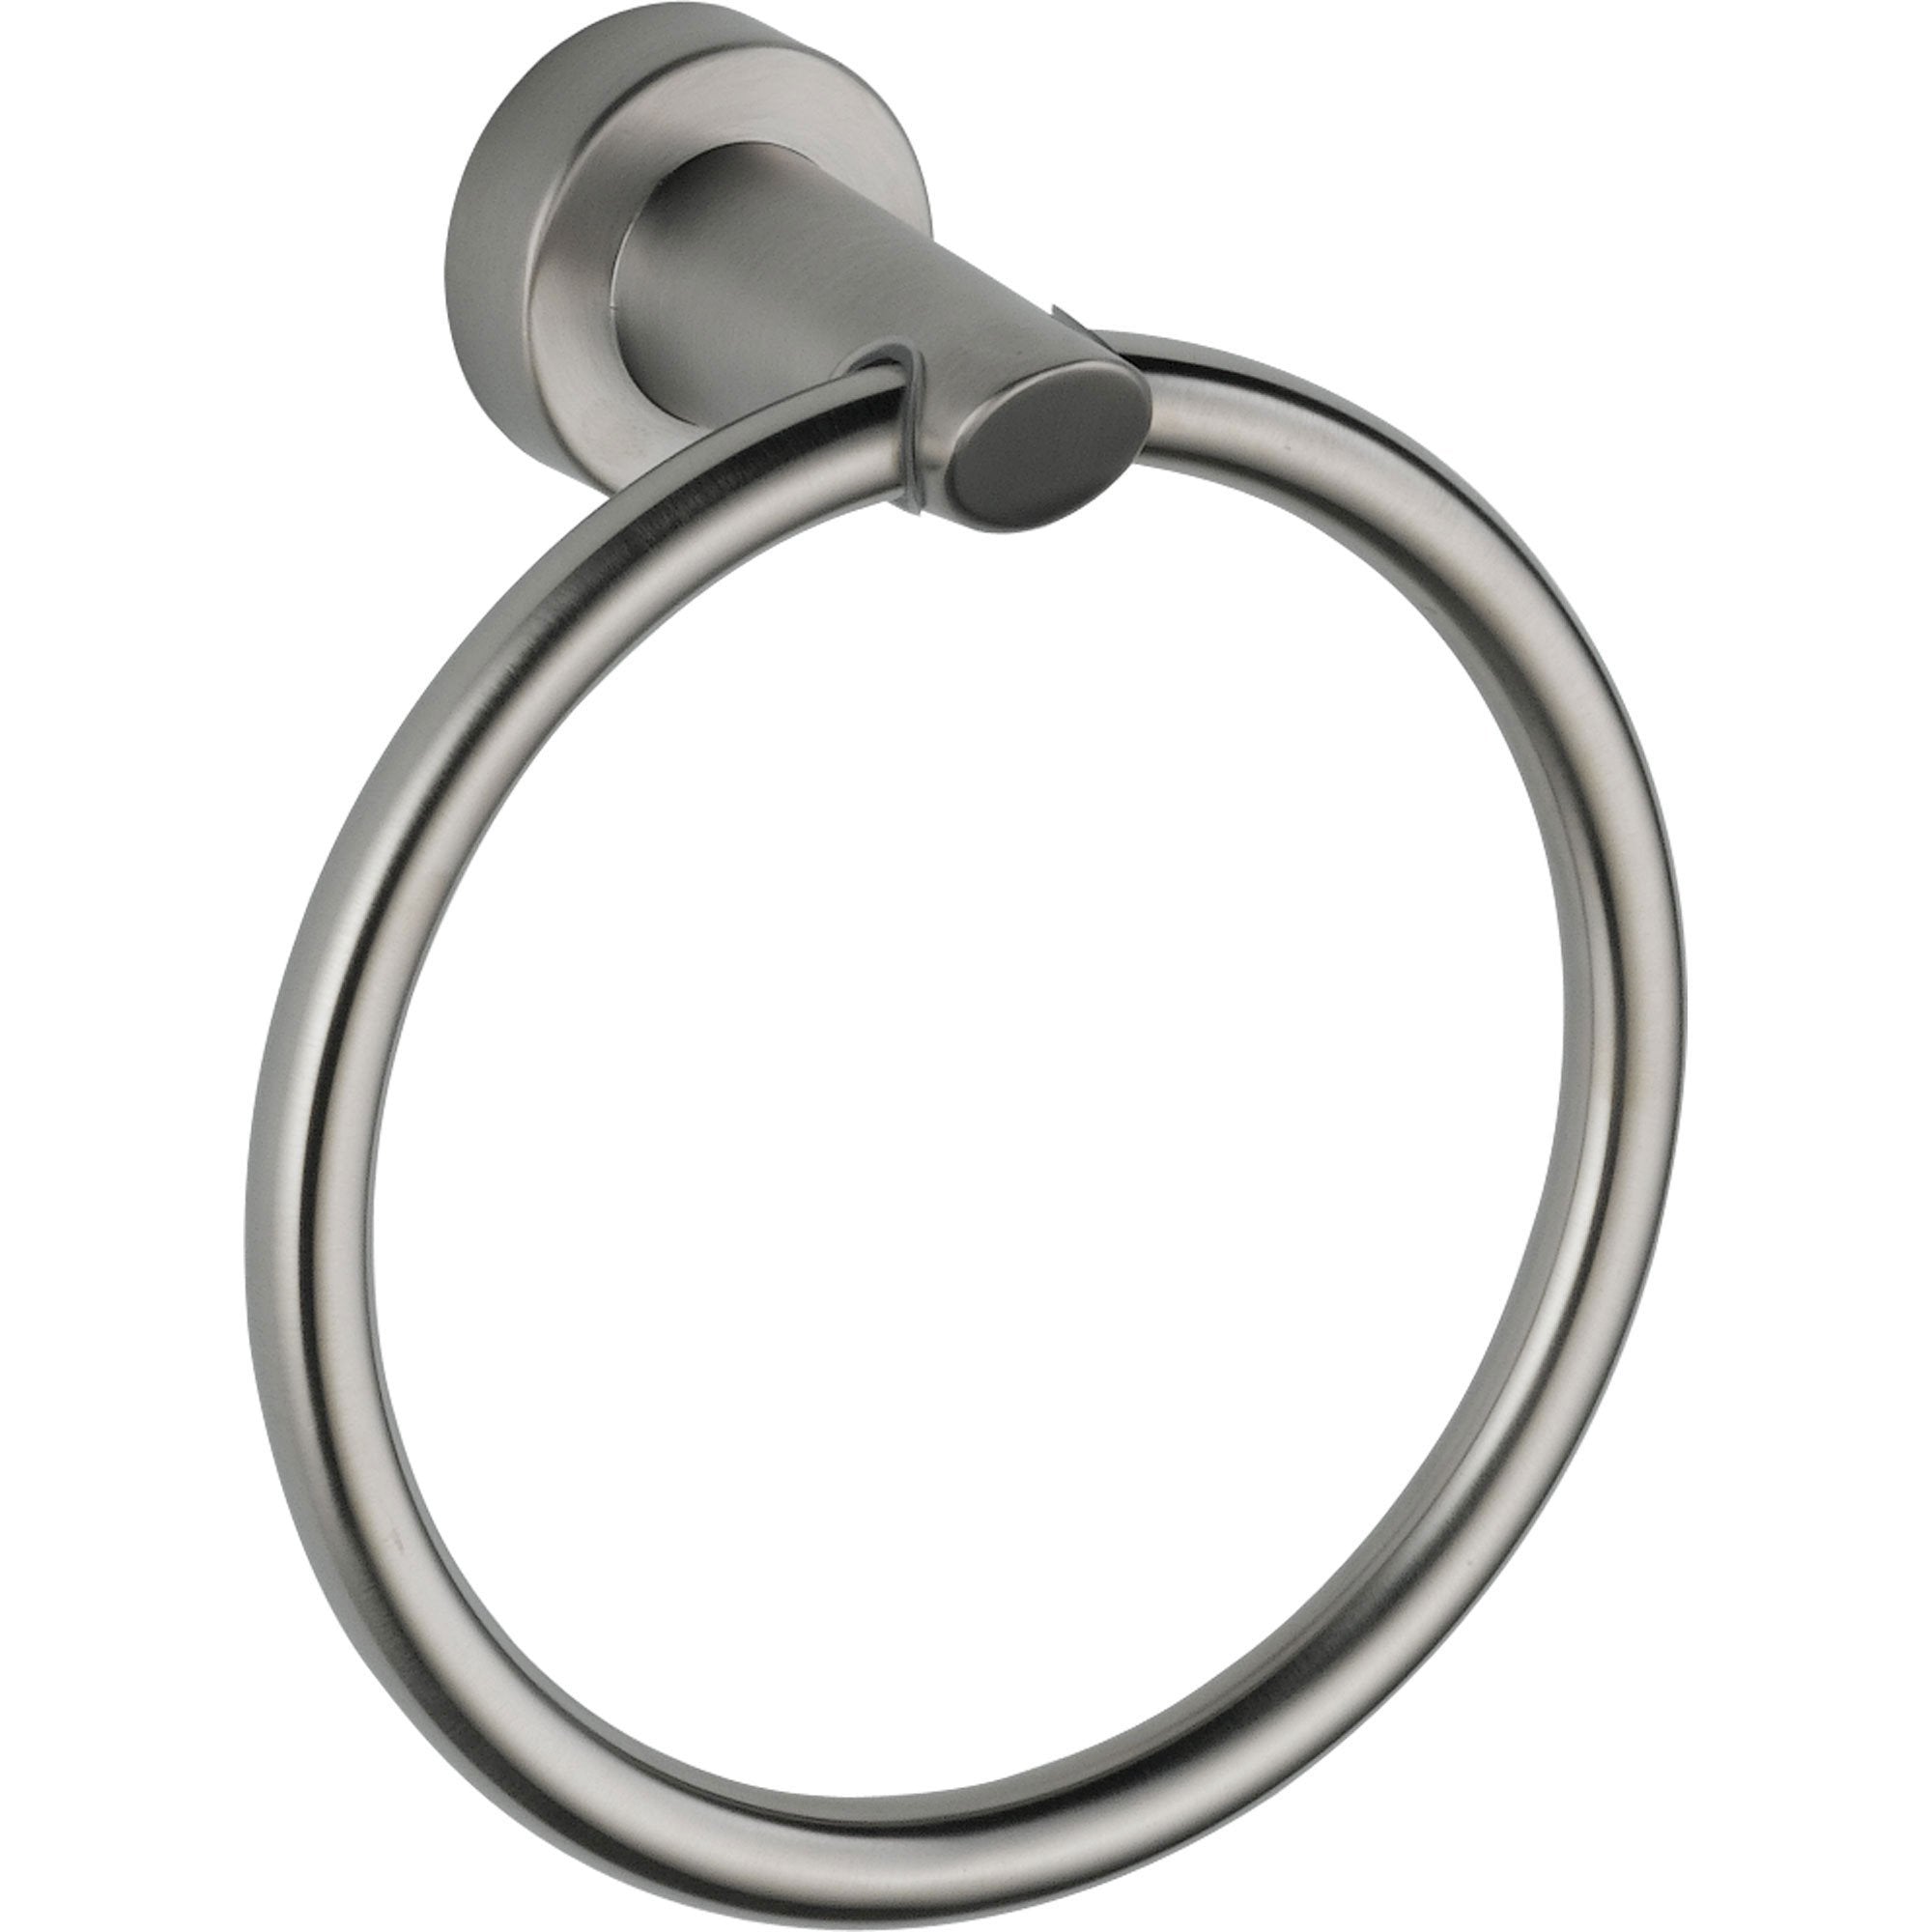 Delta Compel Stainless Steel Finish Modern Hand Towel Ring 353001